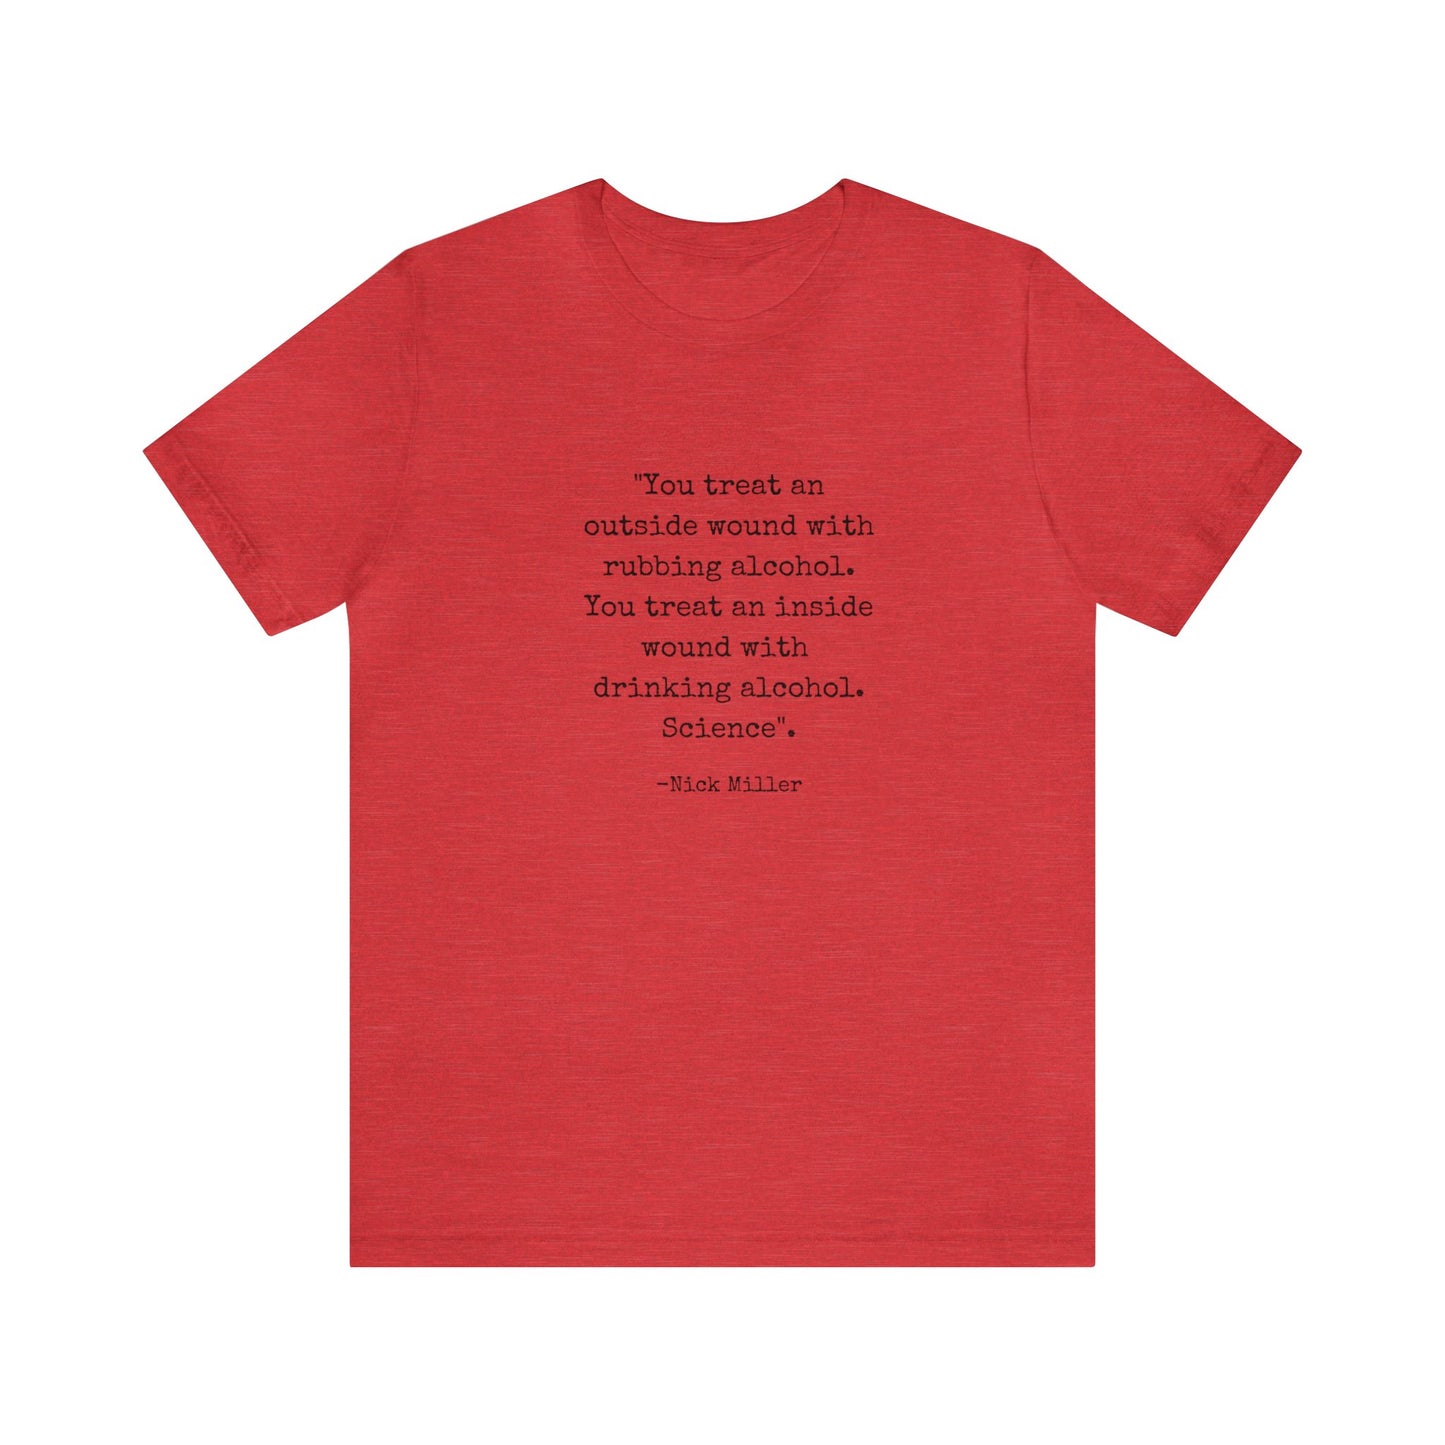 Nick Miller "alcohol" quote tee - New Girl fan t-shirt gift